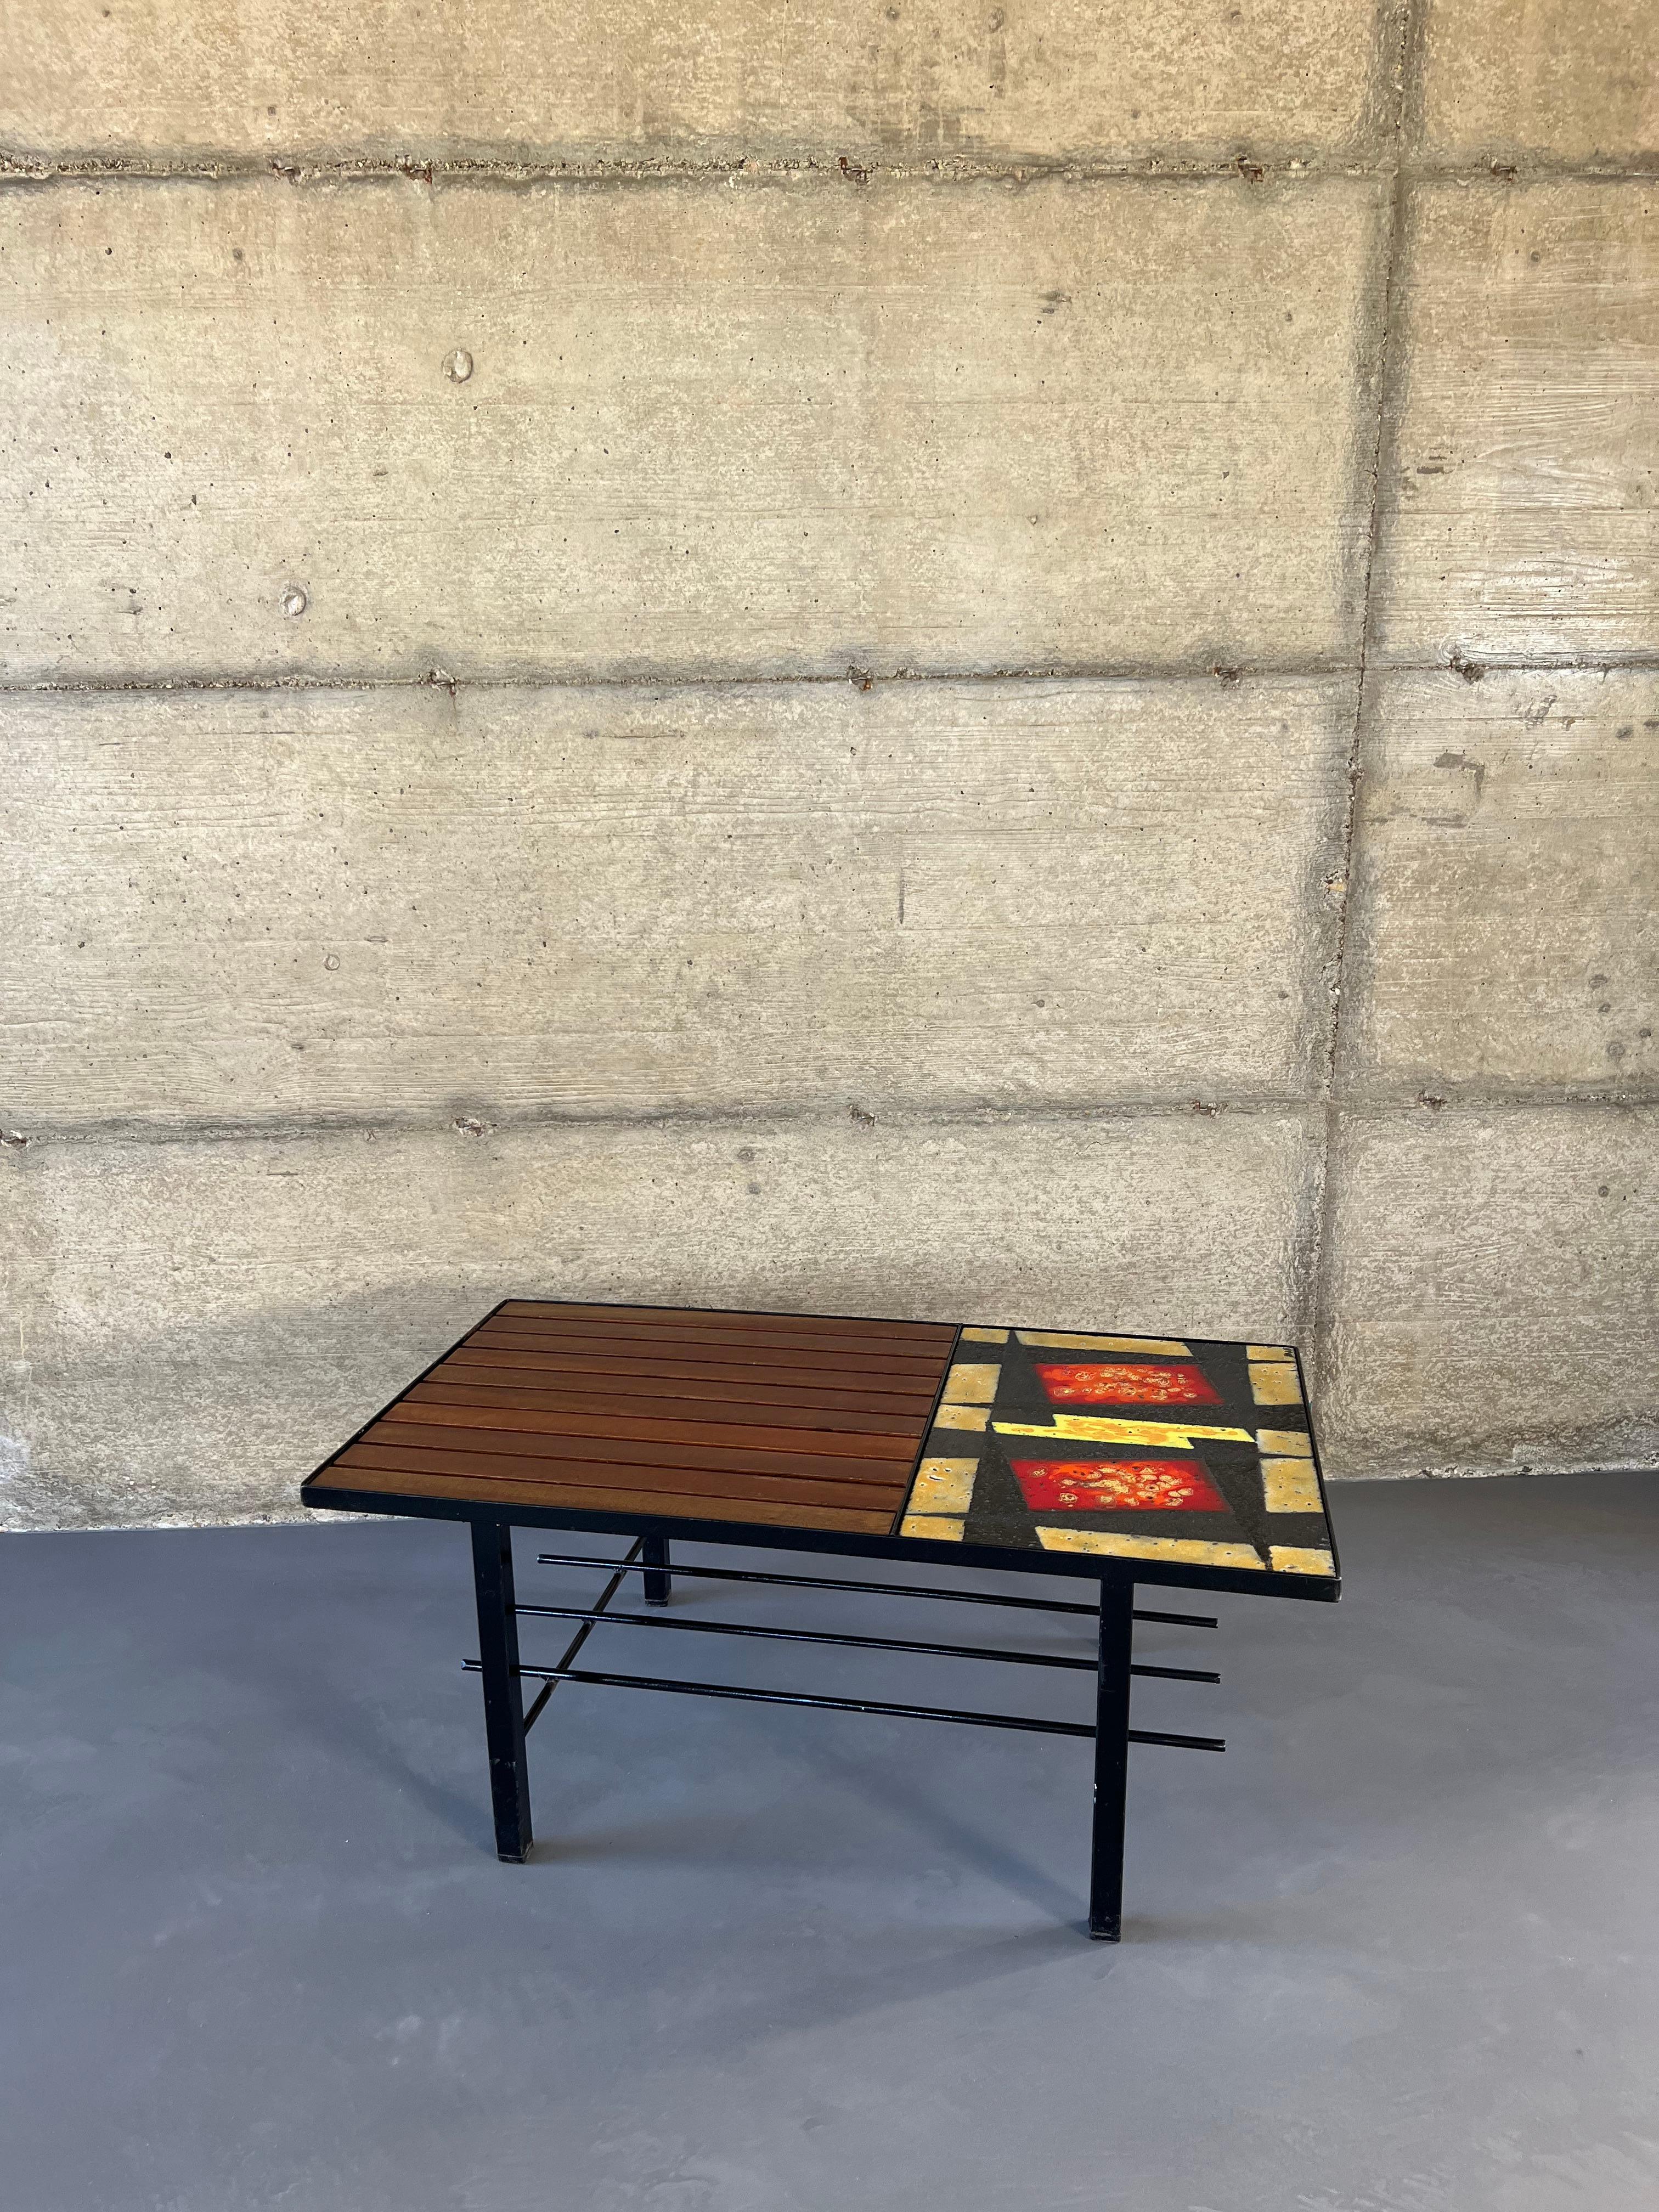 Modernist coffee table with cast iron structure and bi-material lava stone and teak slatted top. From the 50s and 60s, the table is in very good vintage condition and is adorned with a very pretty patina. It is signed by its creator: MJR.